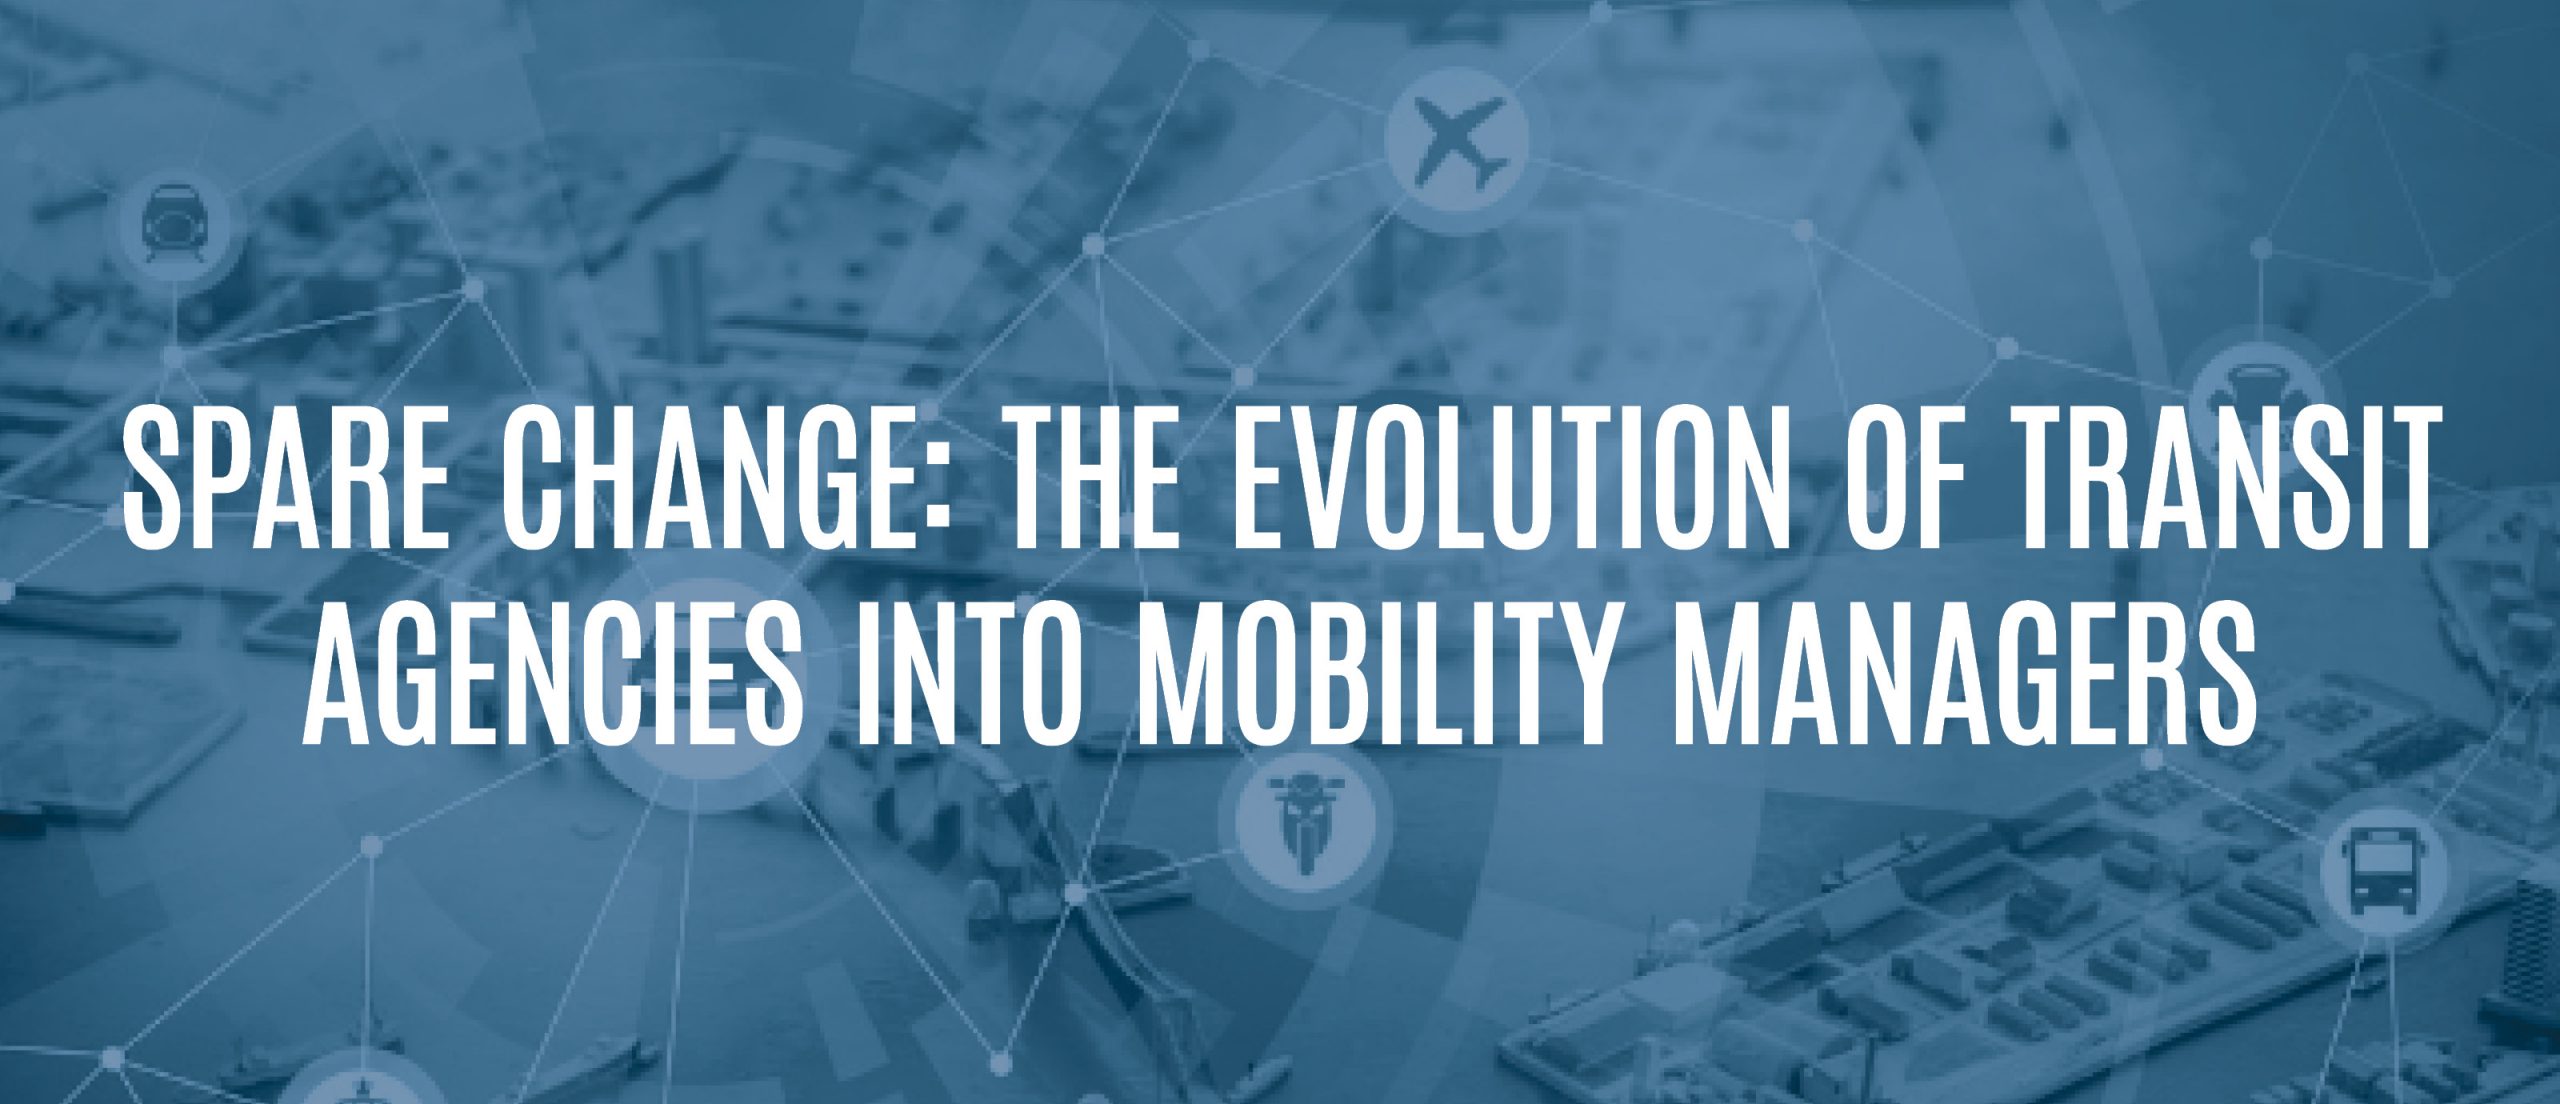 Blog Title - Spare change: the evolution of transit agencies into mobility managers